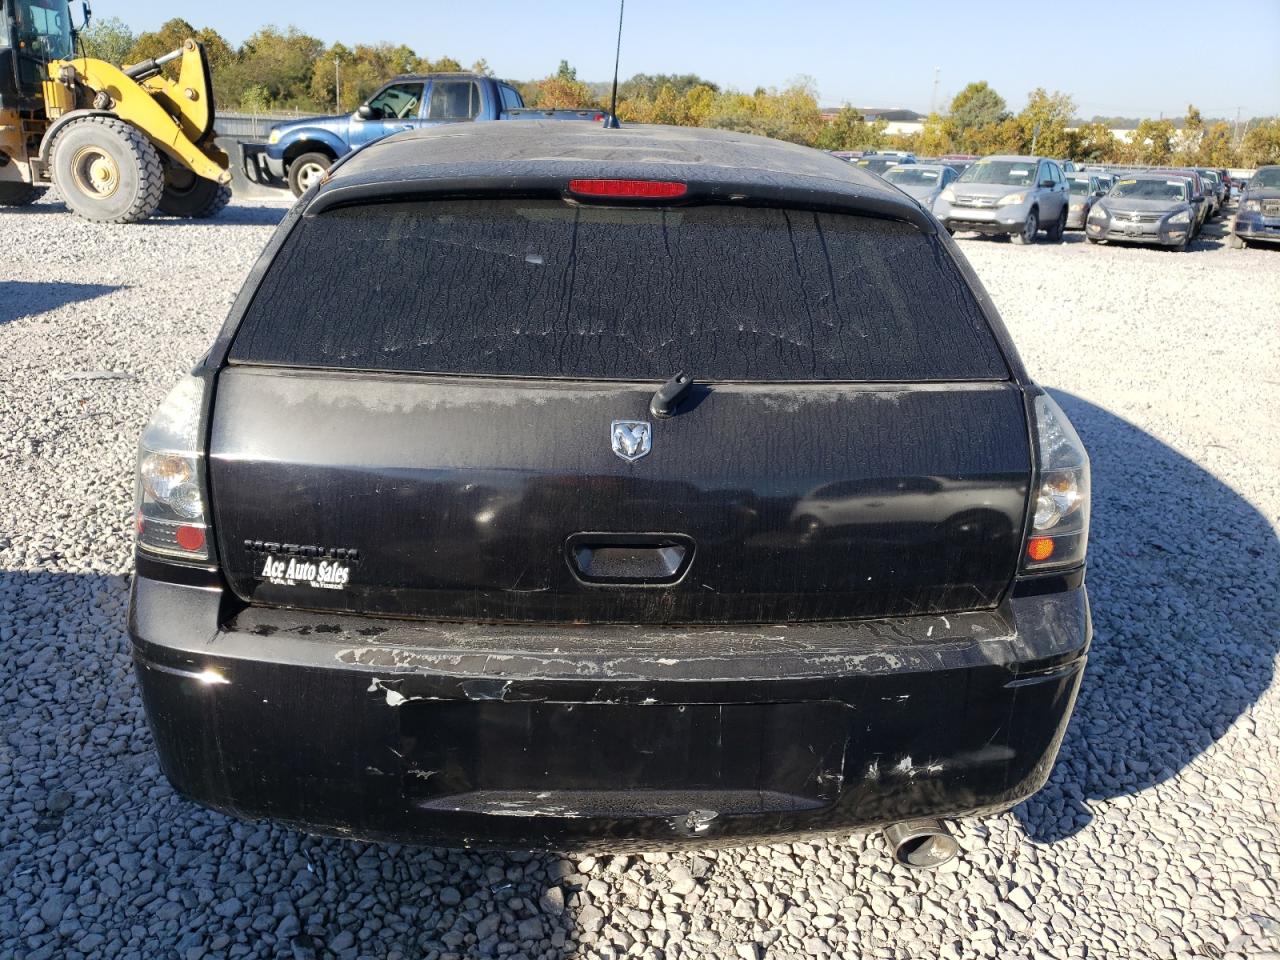 2D4FV47T58H****** Salvage and Repairable 2008 Dodge Magnum in Alabama State